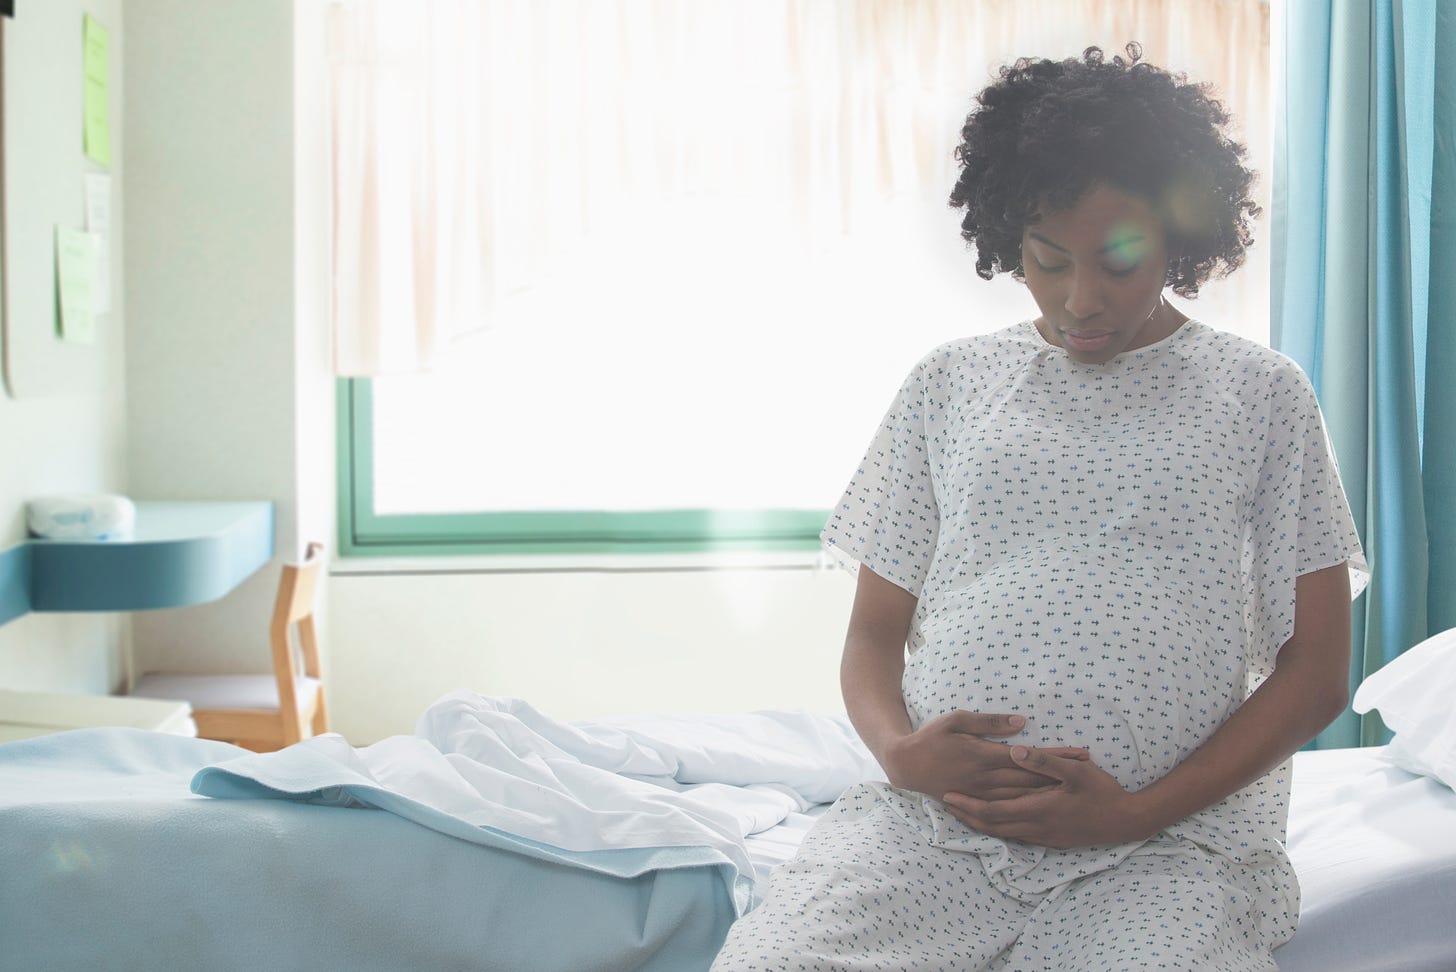 An image of a Black pregnant person in a medical gown, sitting on a hospital bed and holding their pregnant belly as they look down at it.